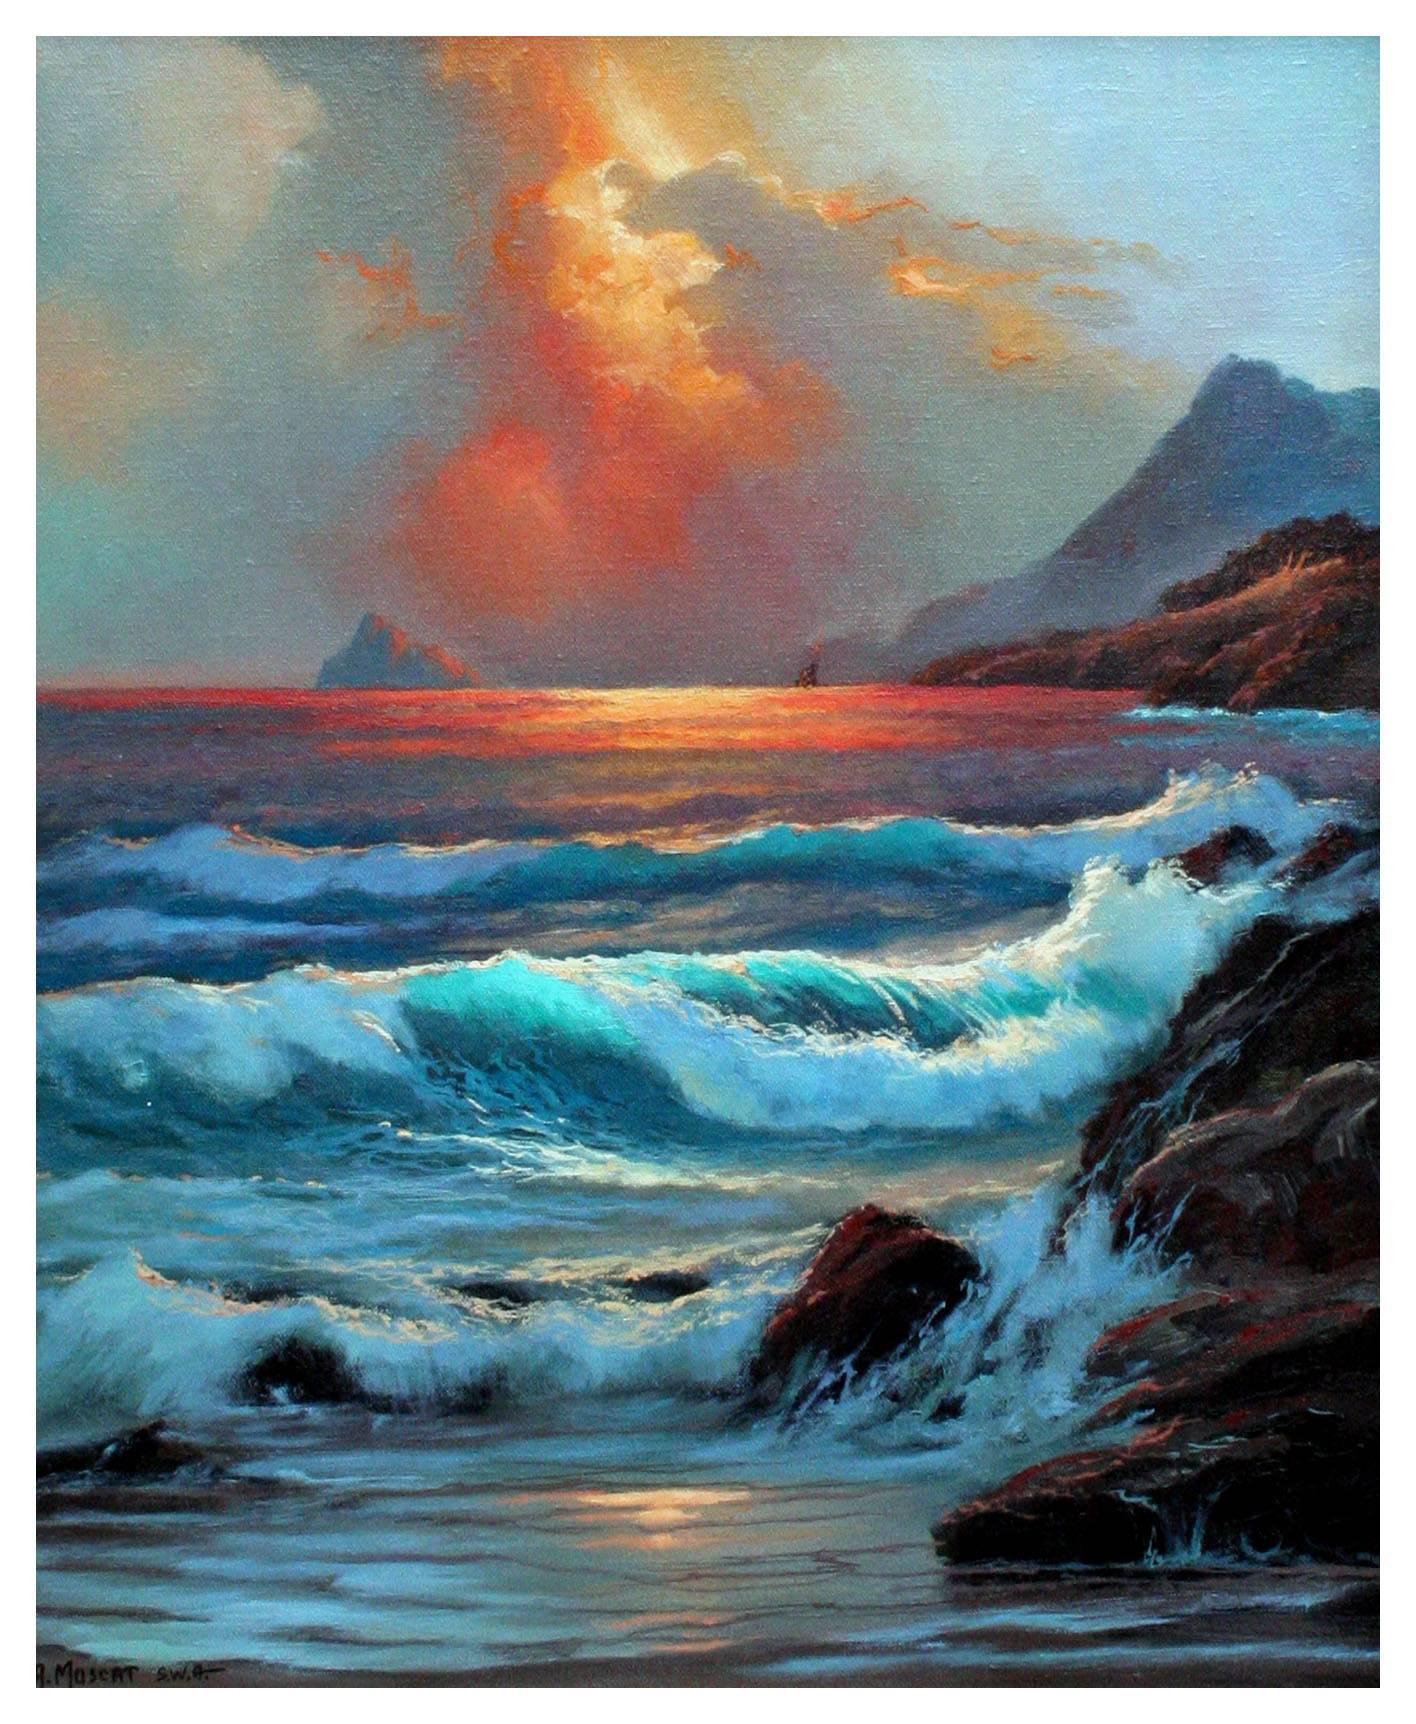 Ocean Storm Seascape - Painting by Anthony Muscat